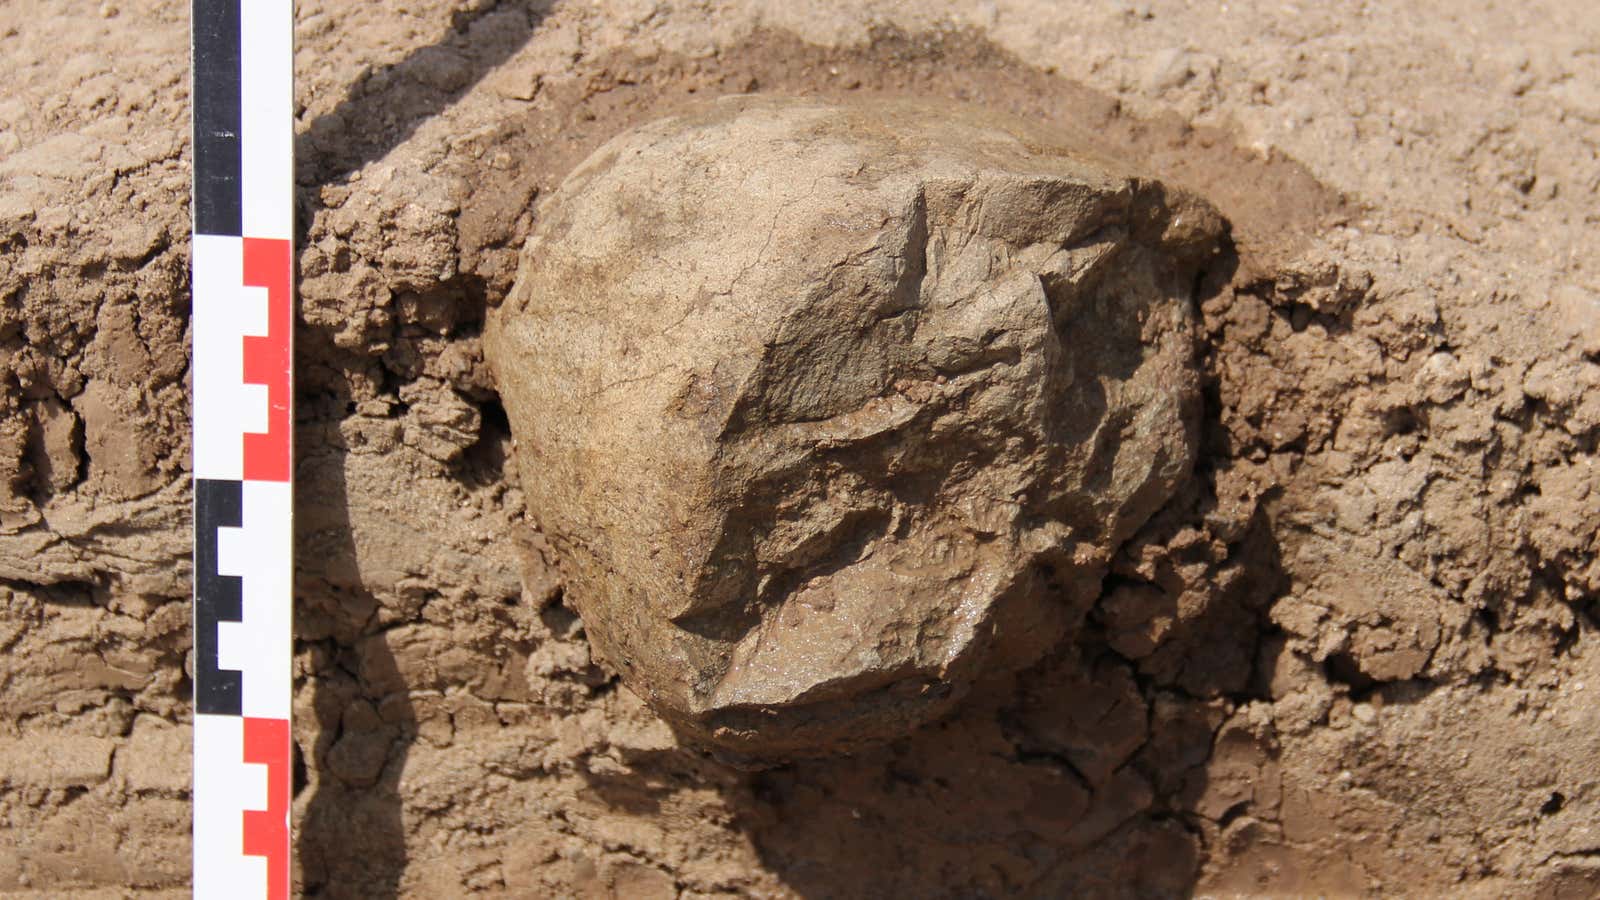 One of the stone tool’s unearthed at the at Lomekwi 3 excavation site.